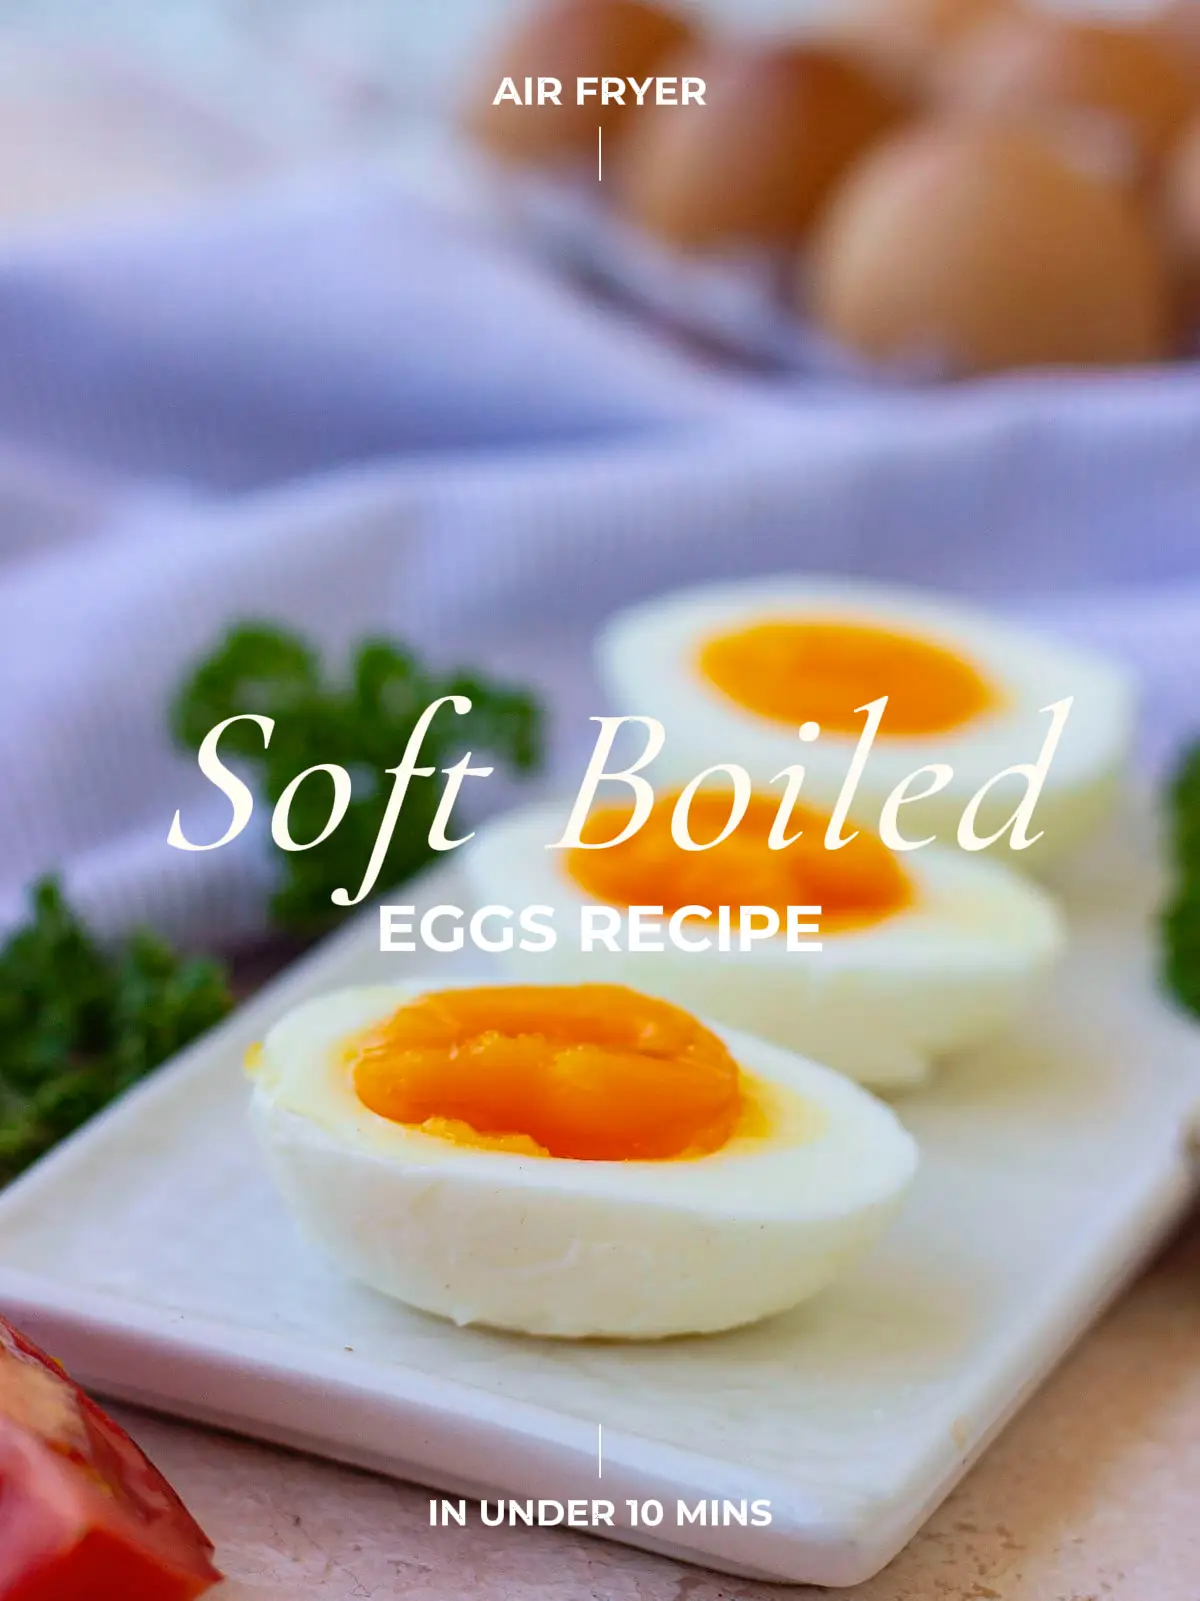 Sherry's Perfect Sous Vide Eggs Recipe